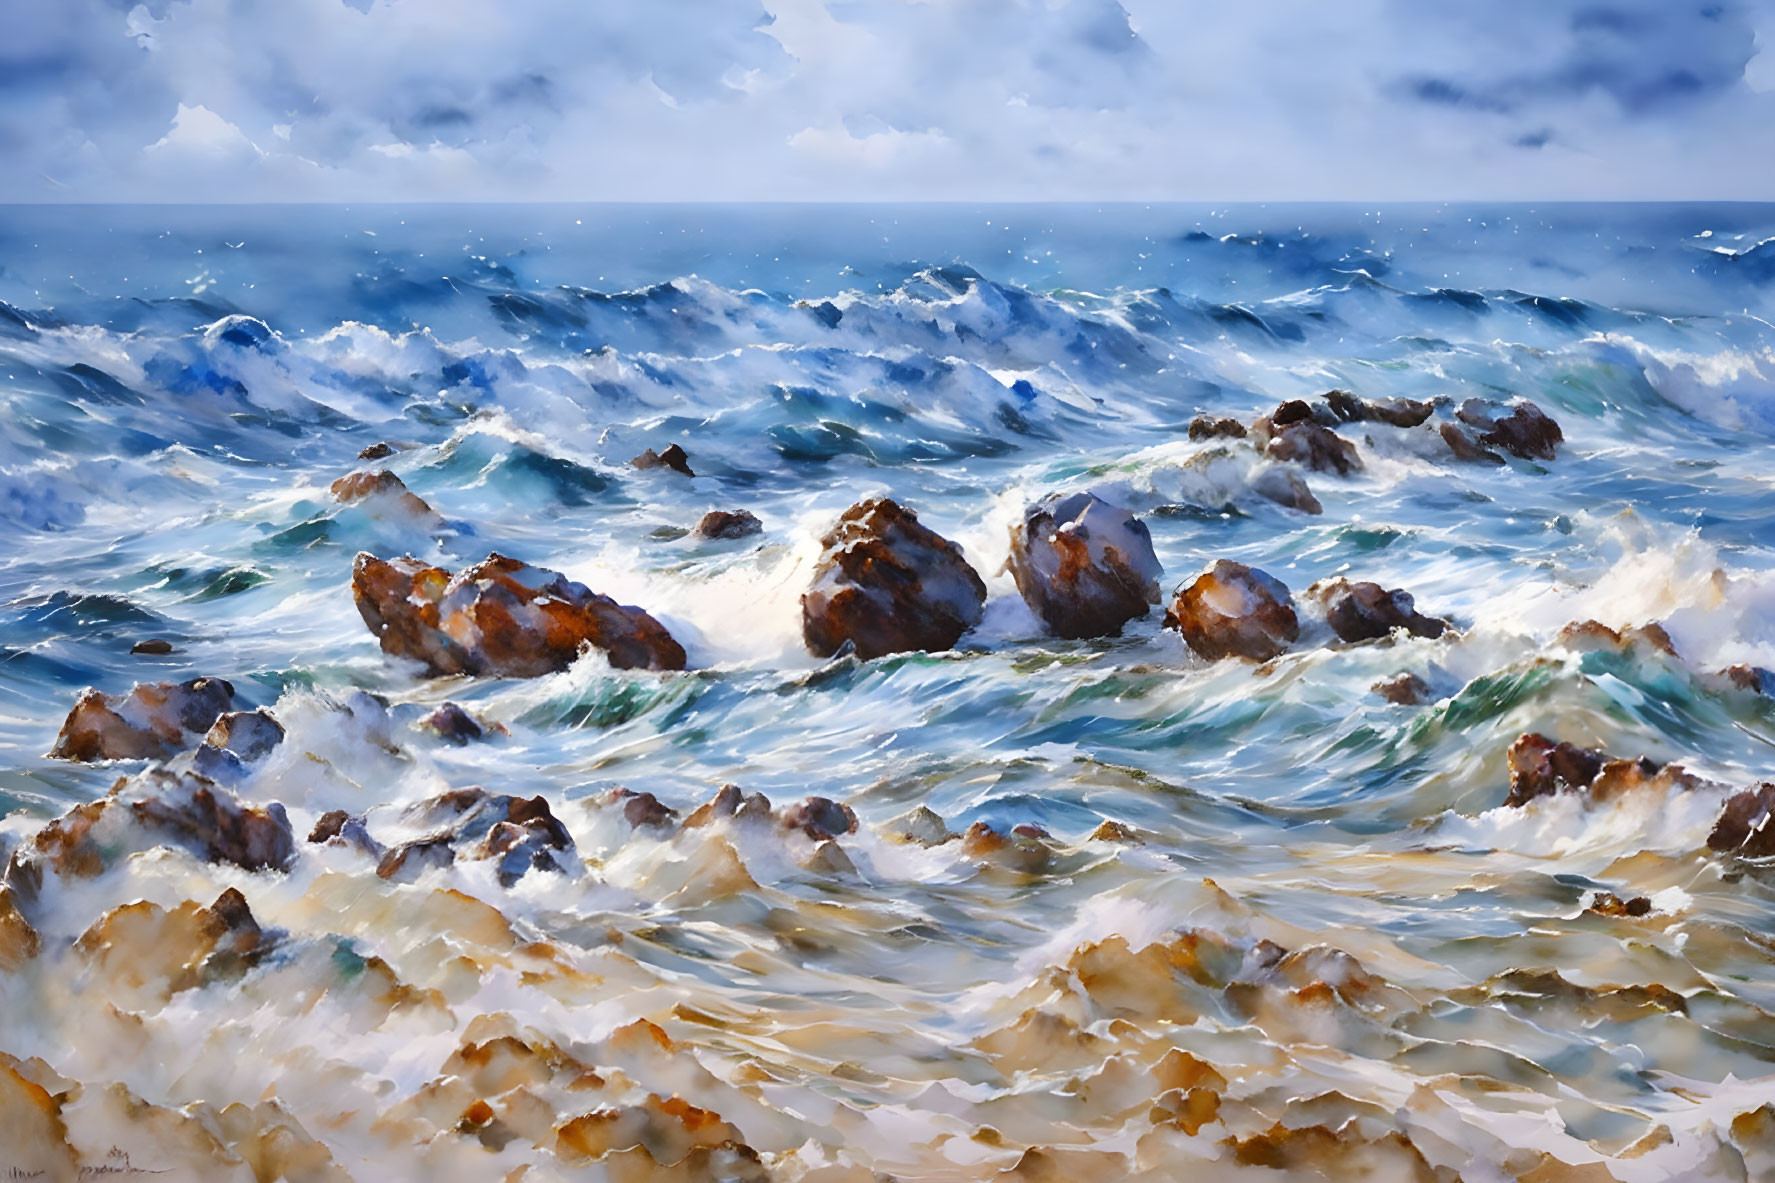 Ocean waves crashing against rocky shoreline under cloudy sky with frothy whitecaps - dynamic coastal scene in blue